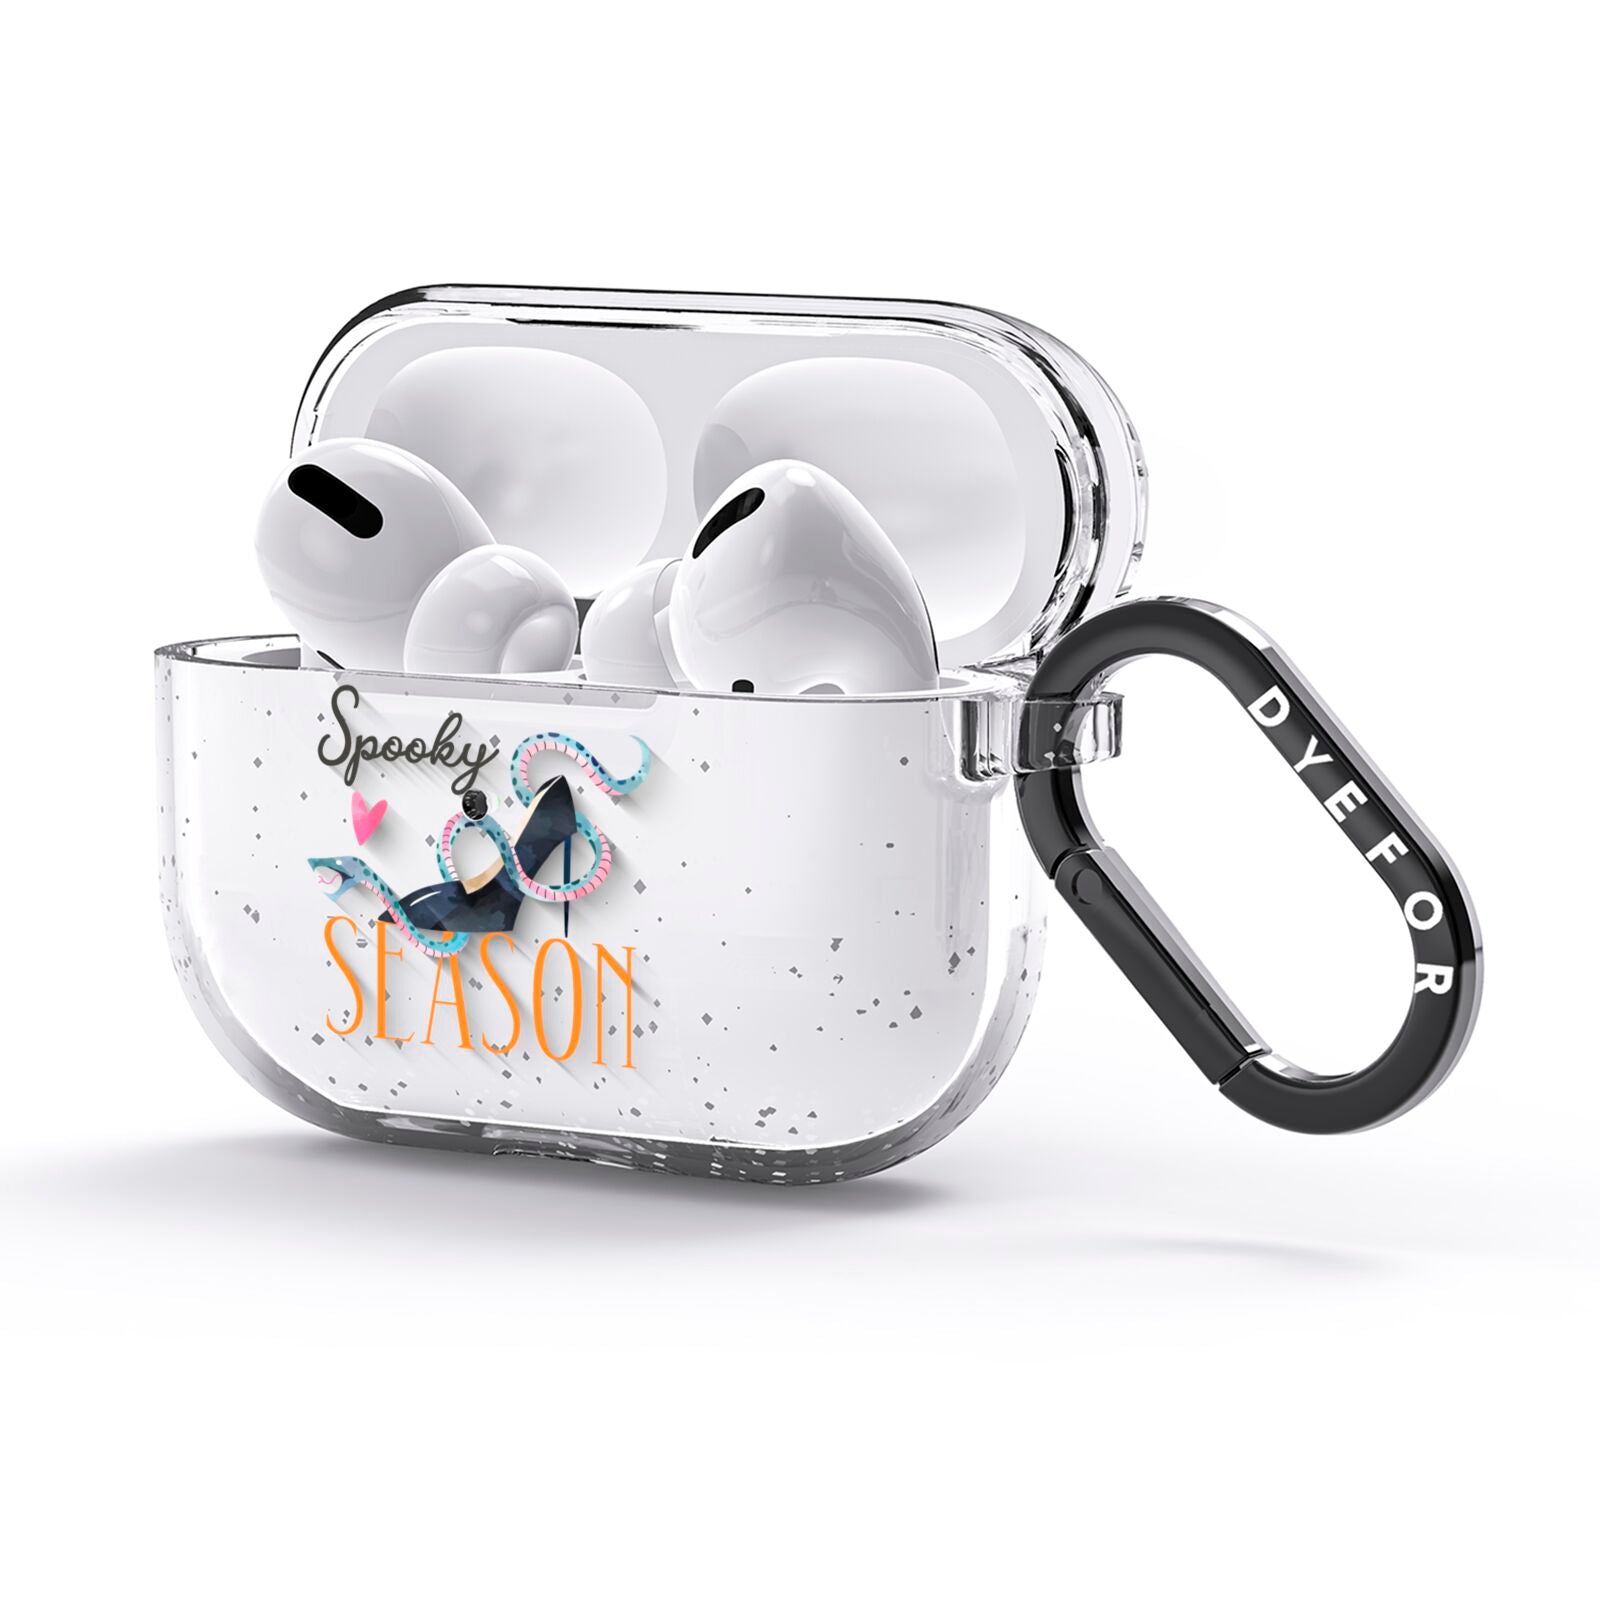 Fun Halloween Catchphrases and Watercolour Illustrations AirPods Glitter Case 3rd Gen Side Image